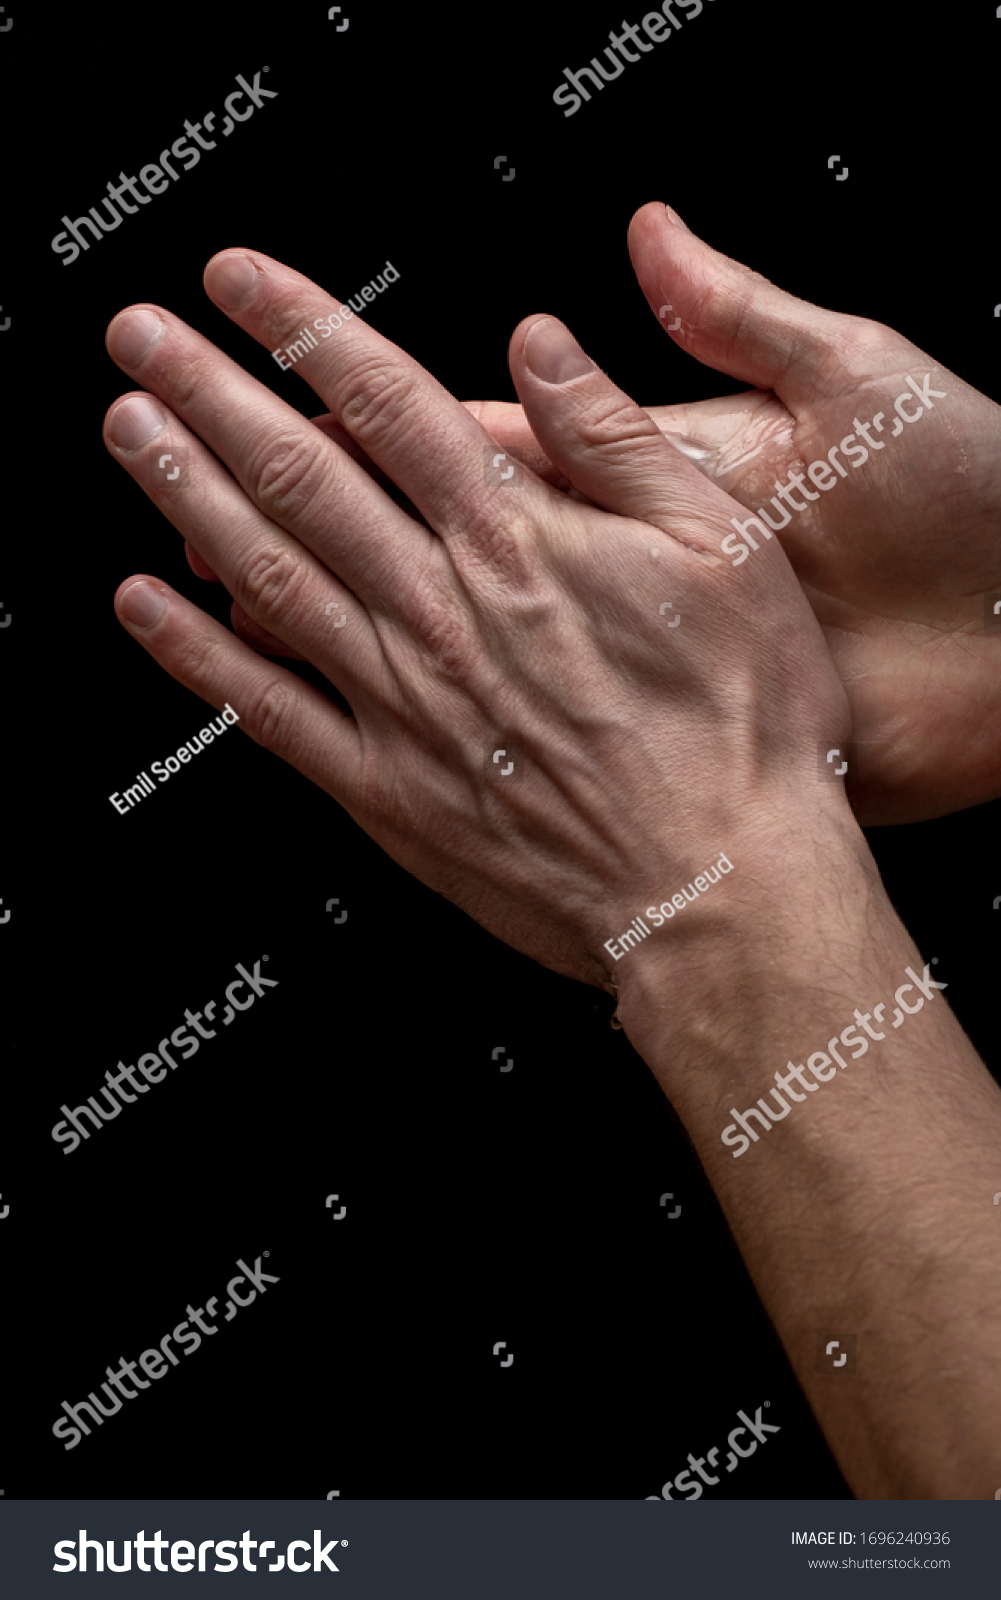 Young man is washing his hands with bubly soap on his hands on a black background, closeup #1696240936